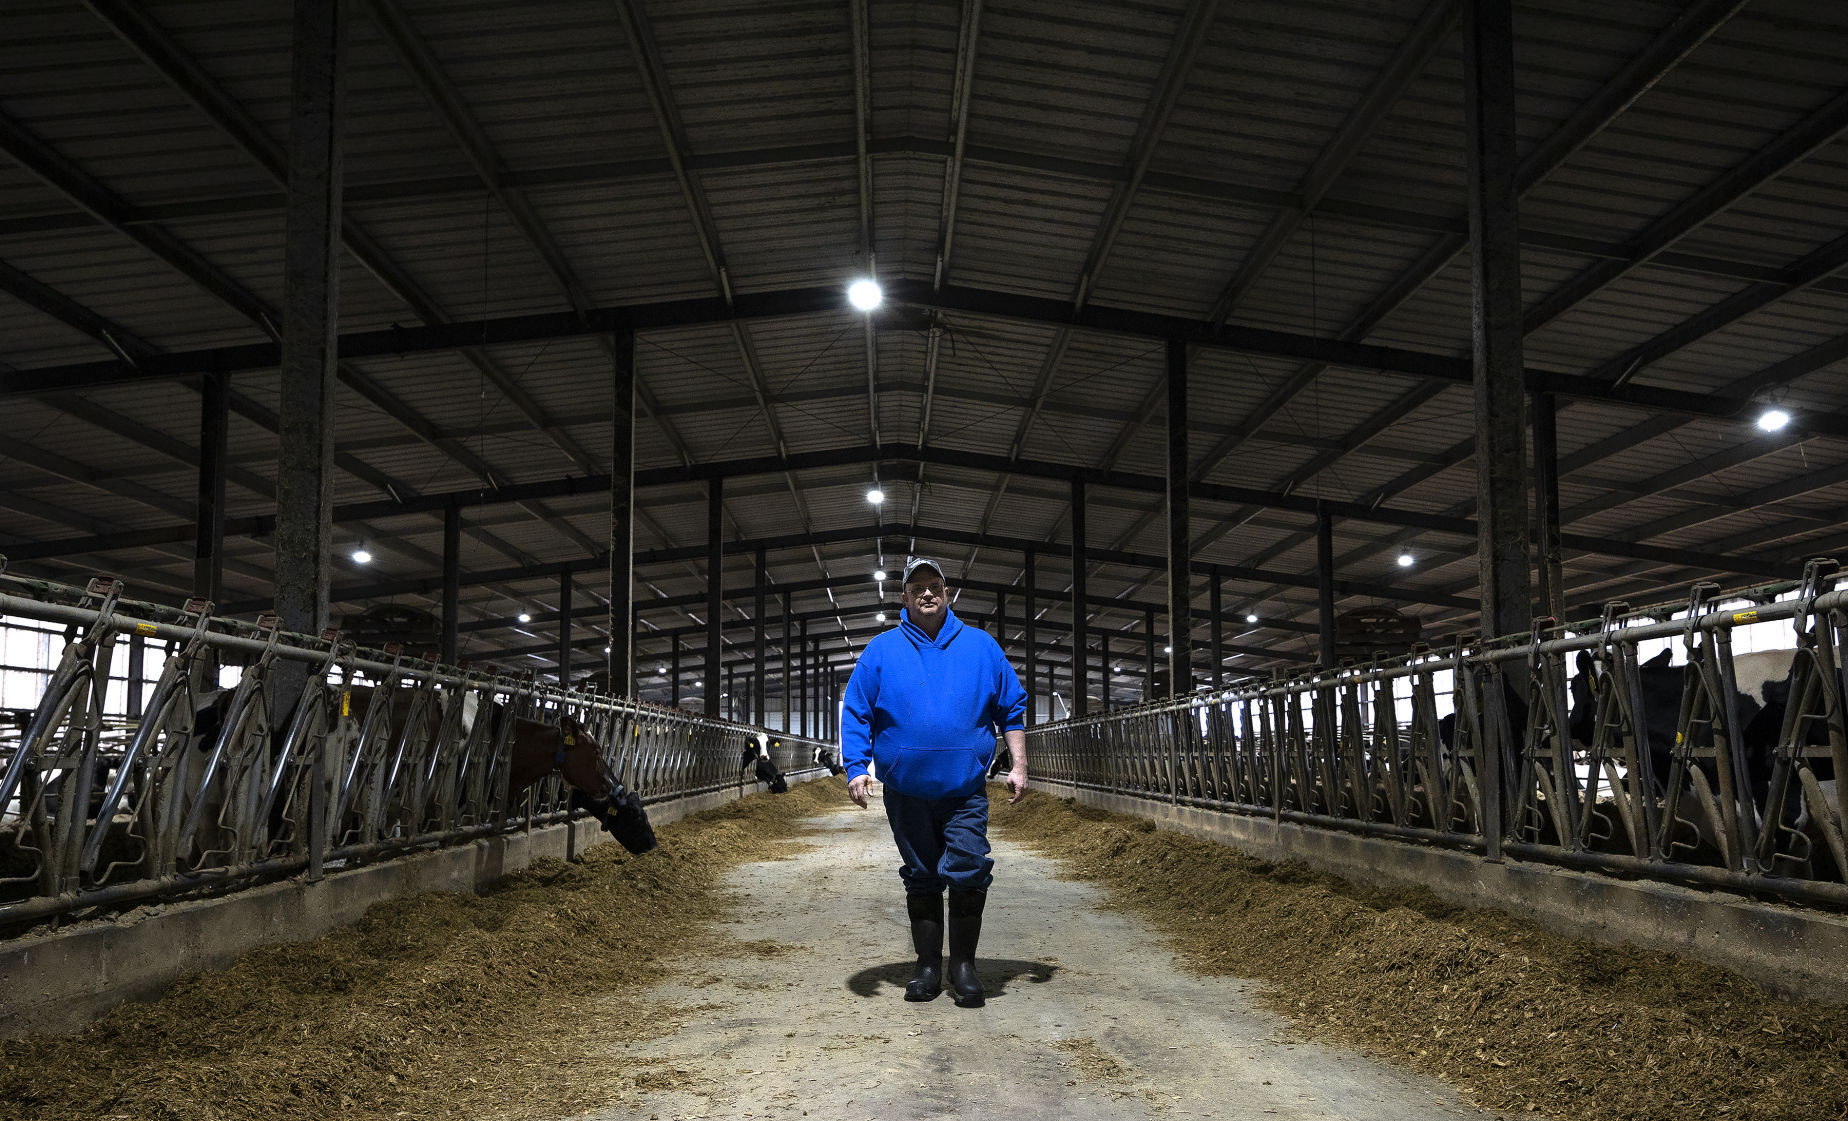 Peter Winch walks through one of the barns on his farm in rural Fennimore, Wis., on Wednesday, March 23, 2022.    PHOTO CREDIT: Stephen Gassman